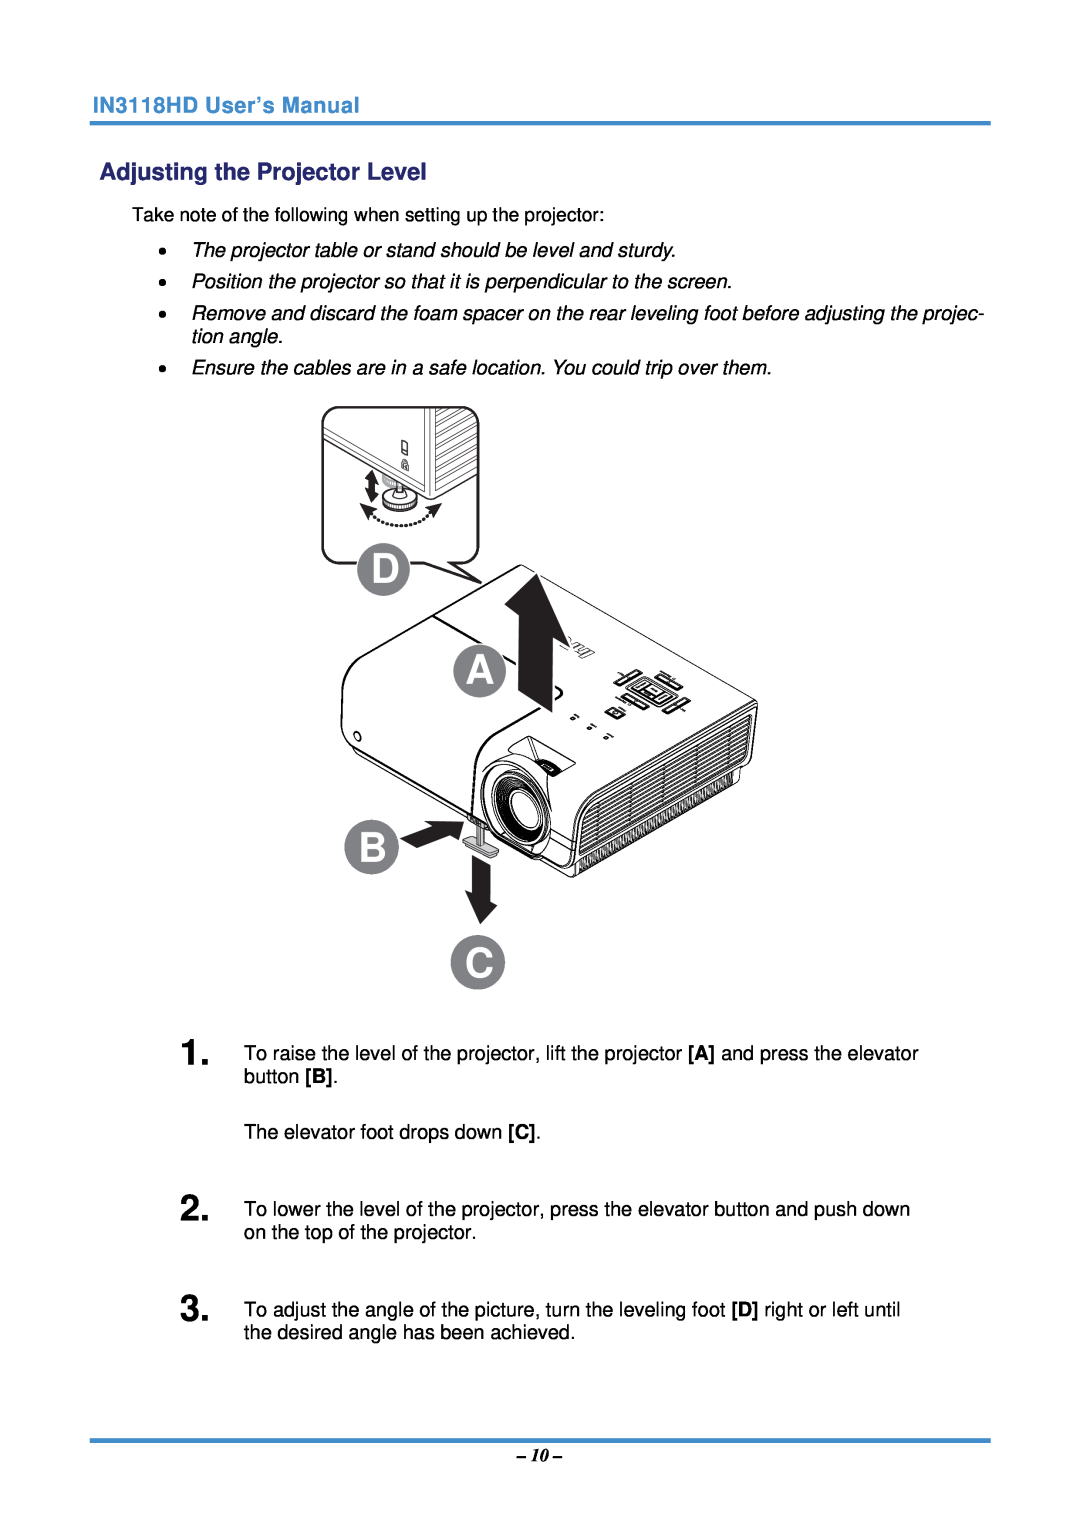 InFocus manual Adjusting the Projector Level, IN3118HD User’s Manual 